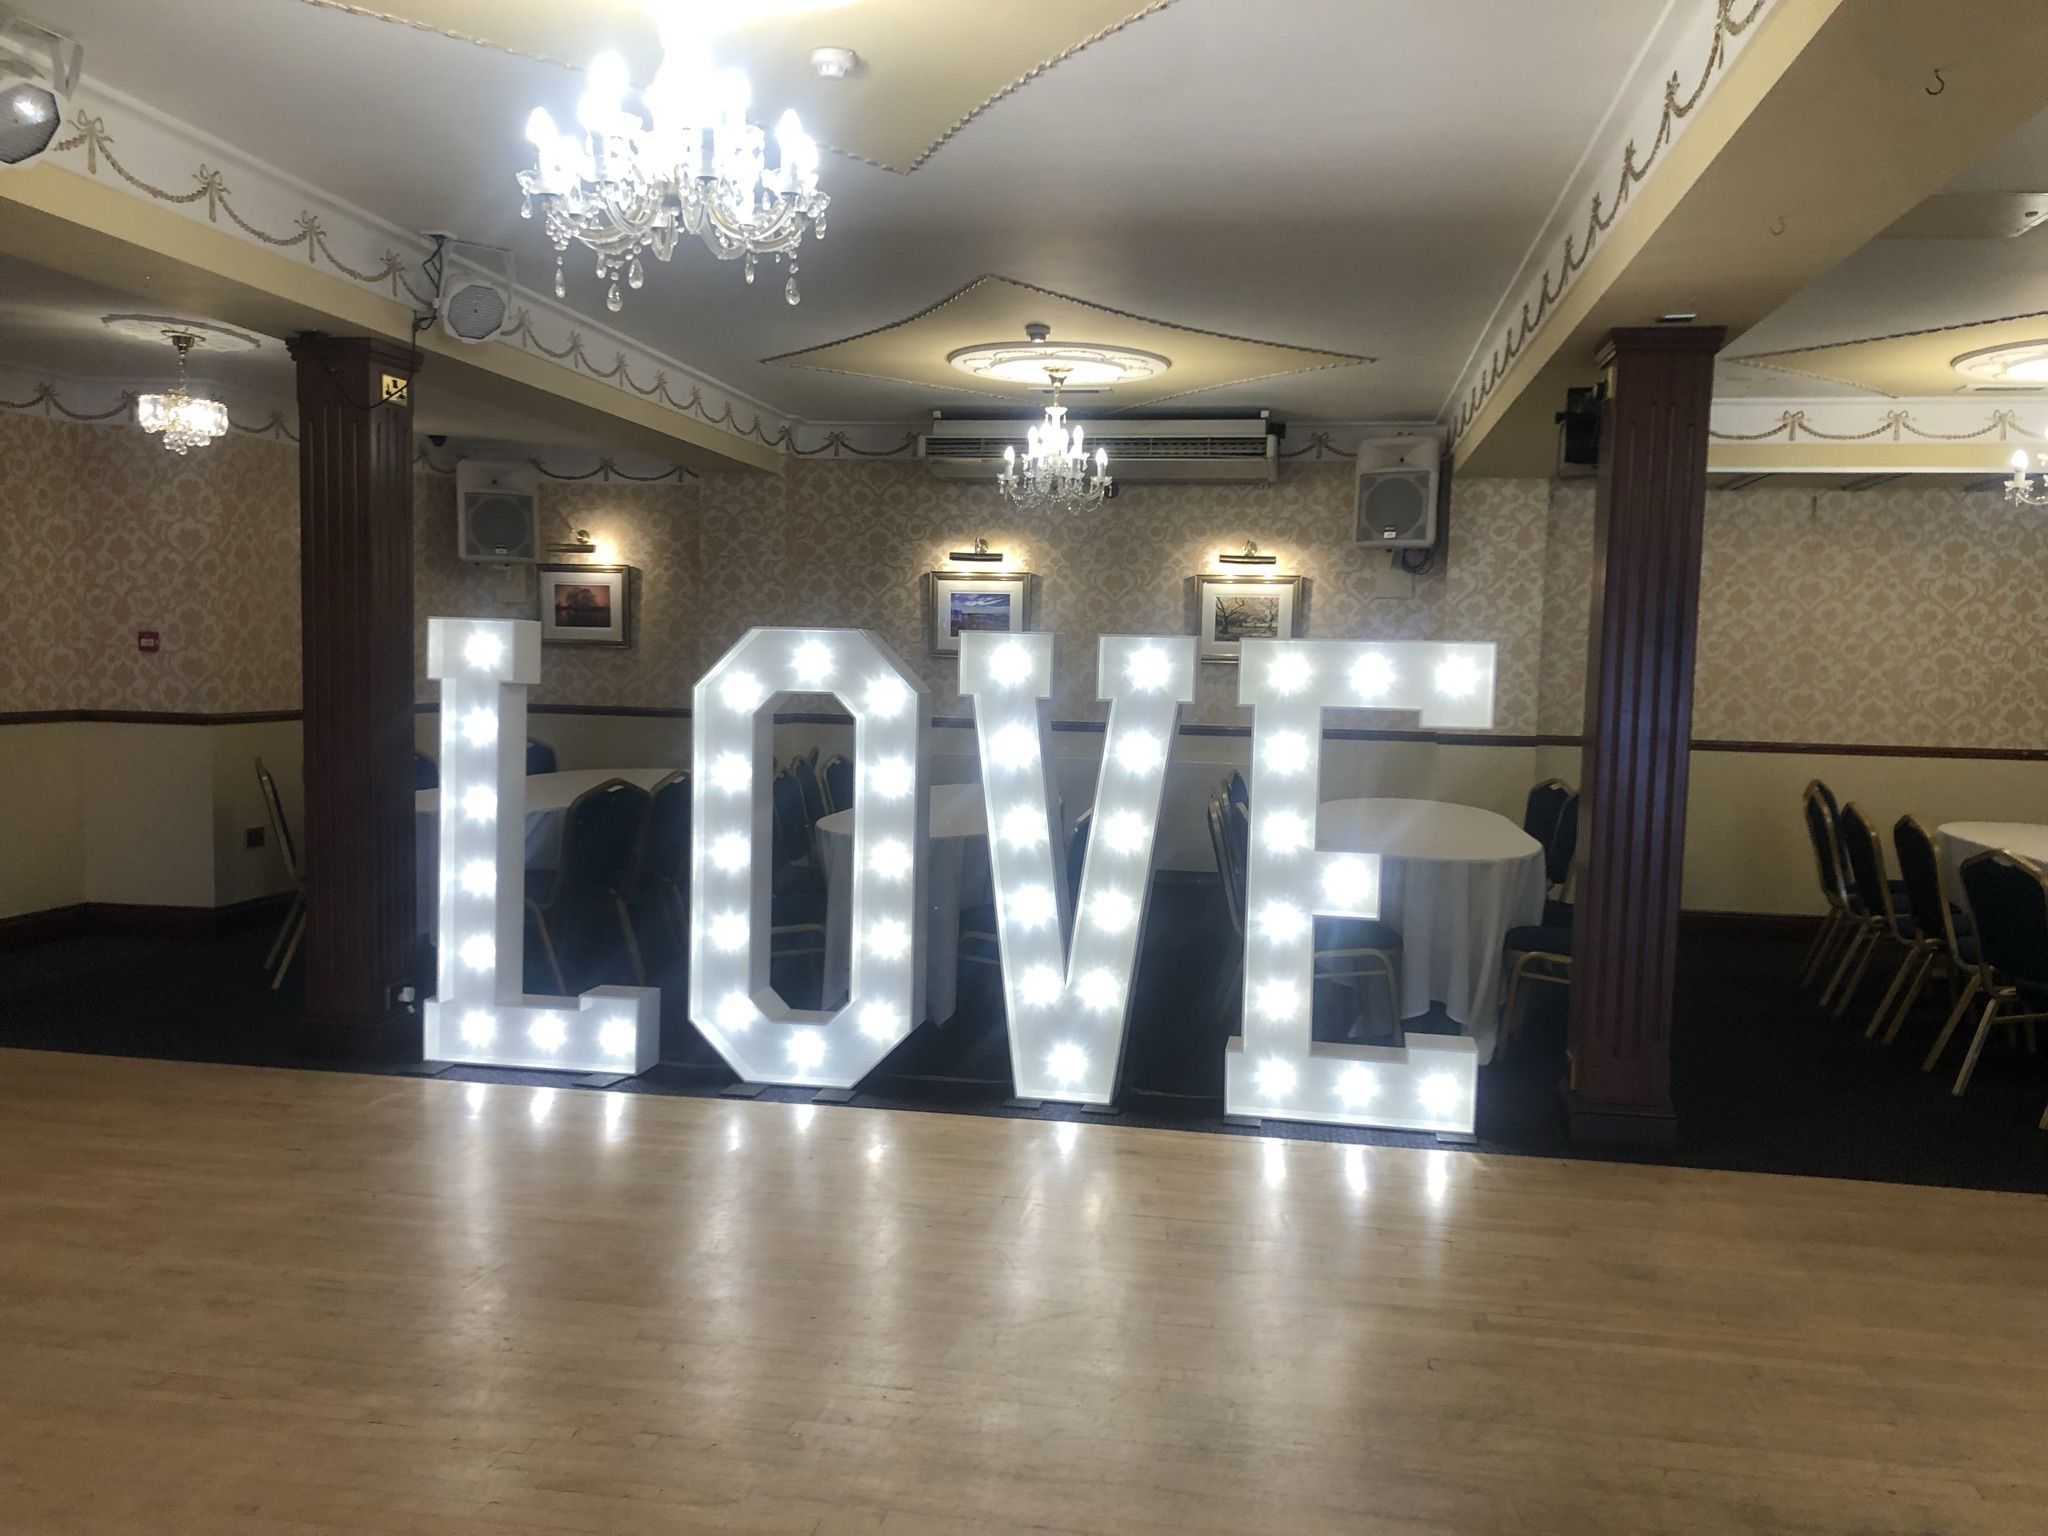 a large lighted love sign in a room.